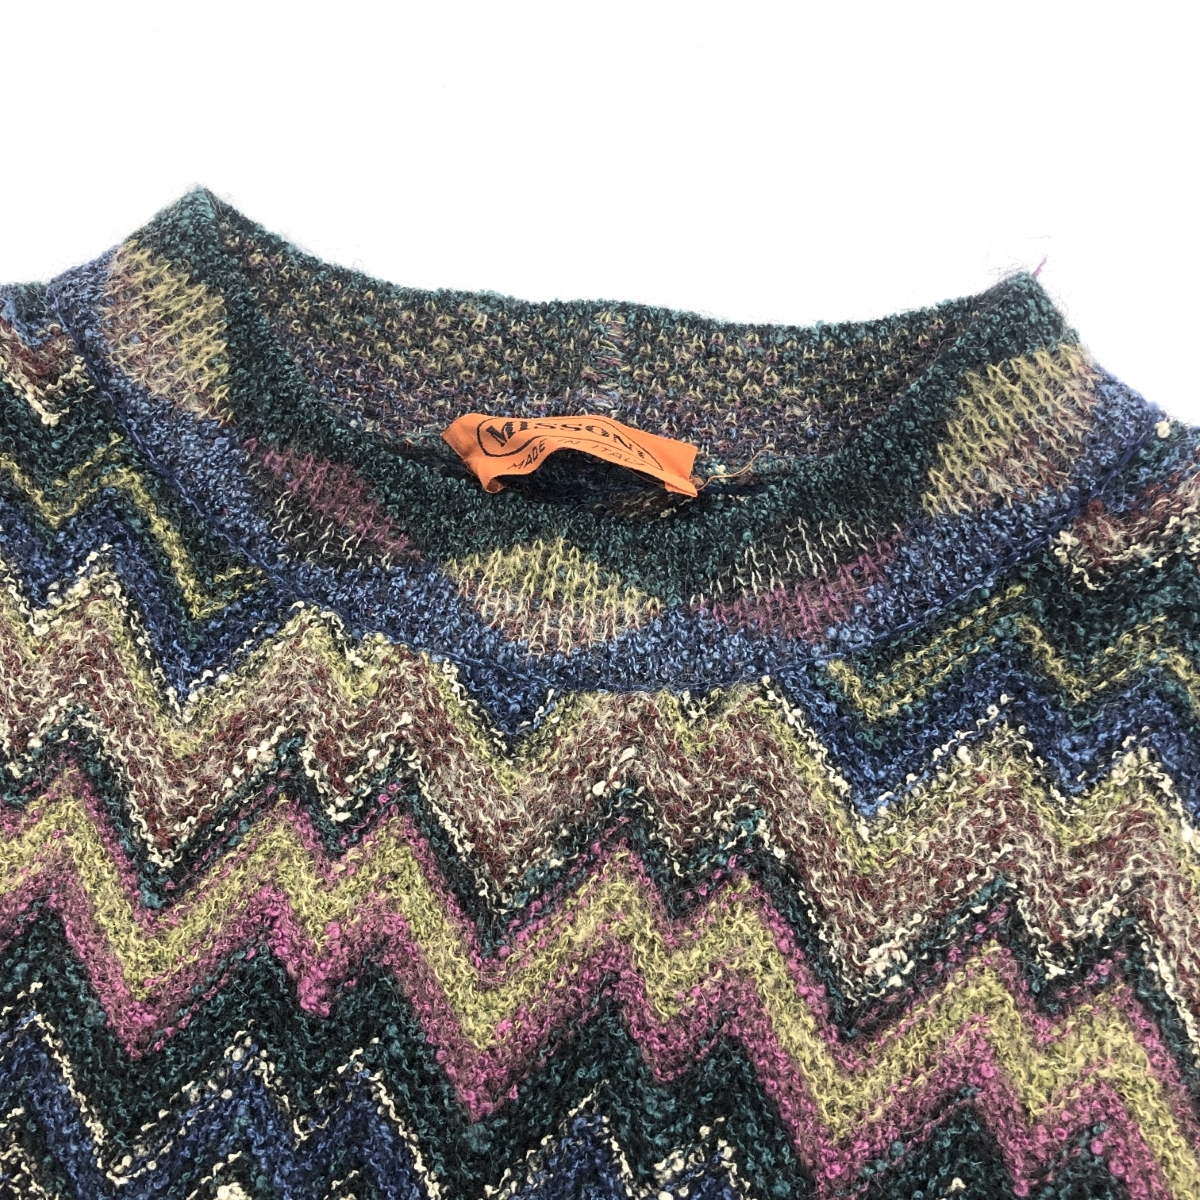 *MISSONI Missoni knitted * multicolor men's tops mo hair .